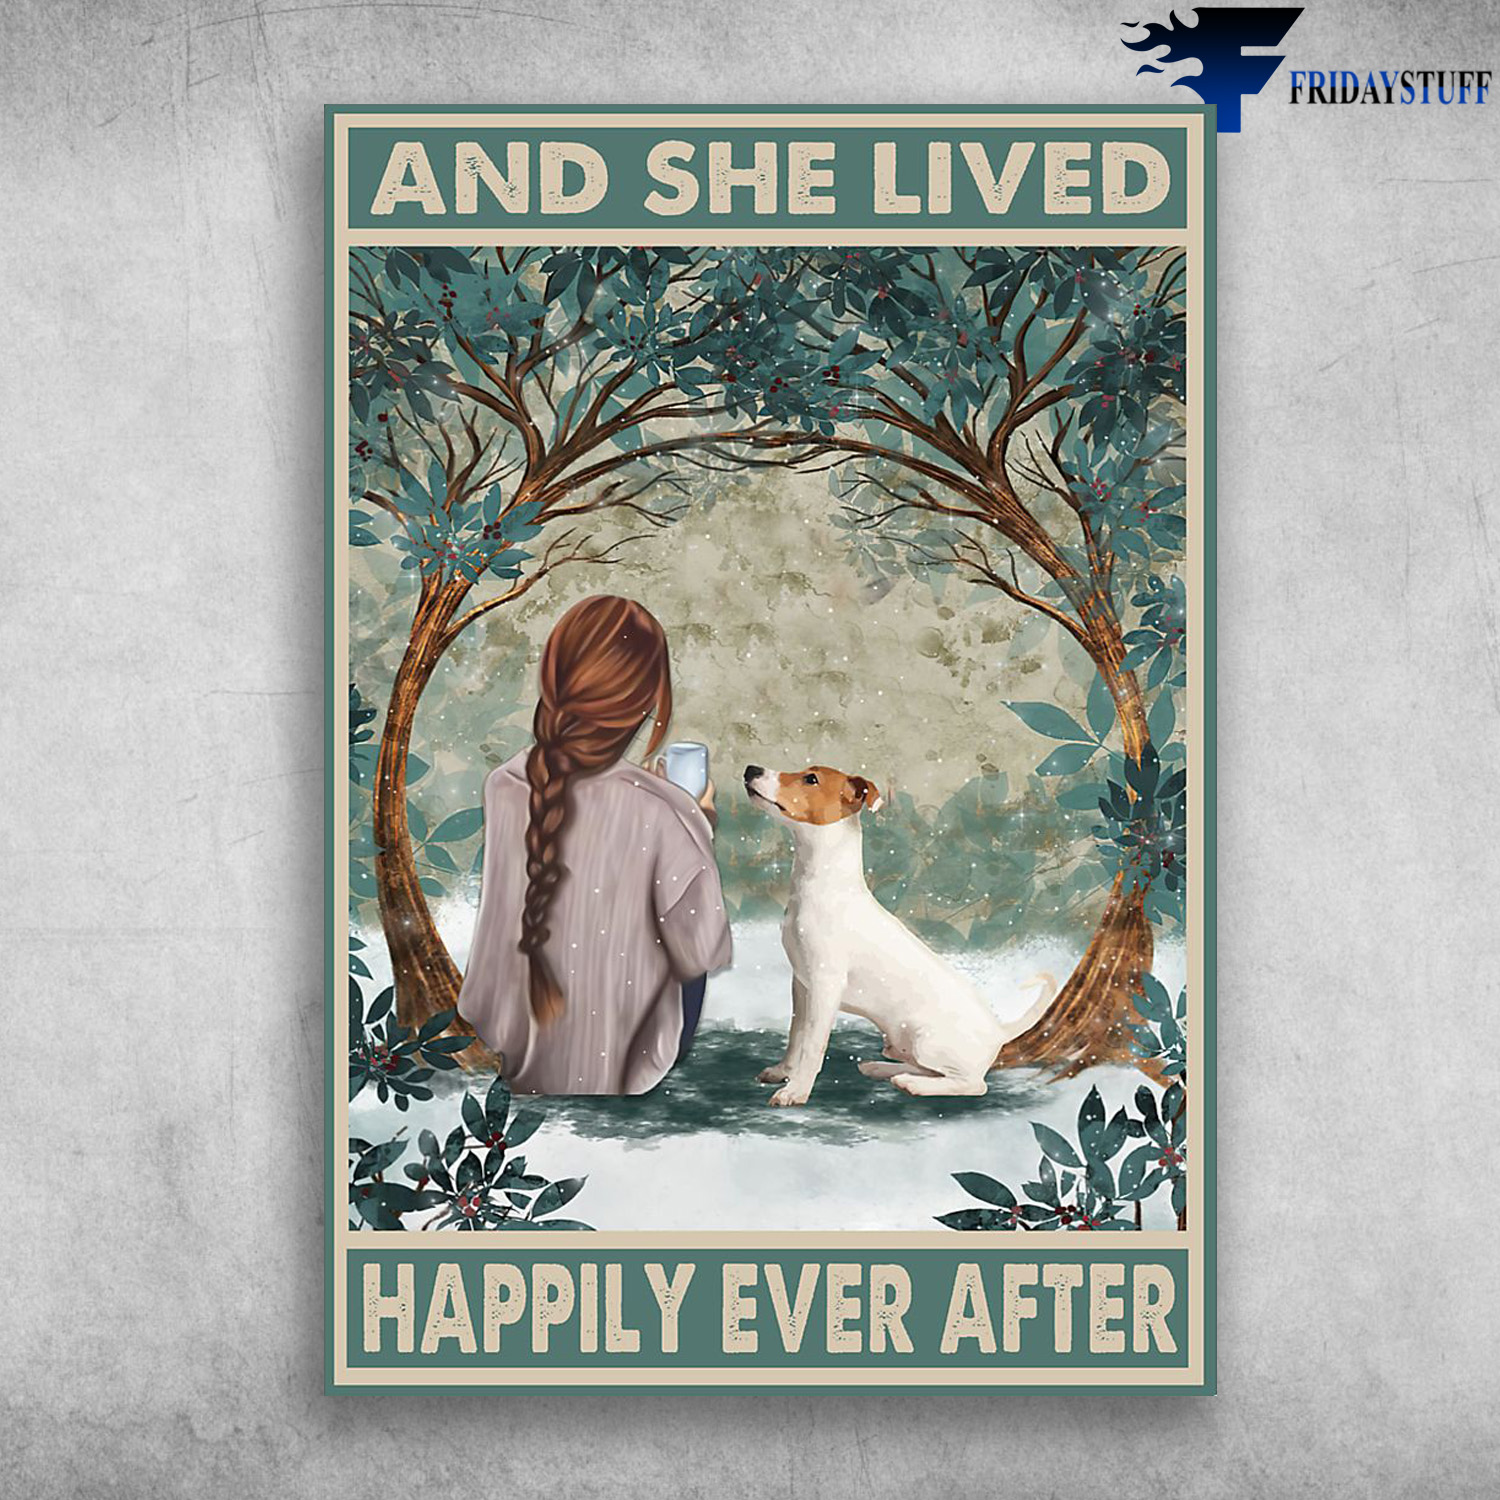 Girl And Jack Russell Dog - And She Live, Happily Ever After